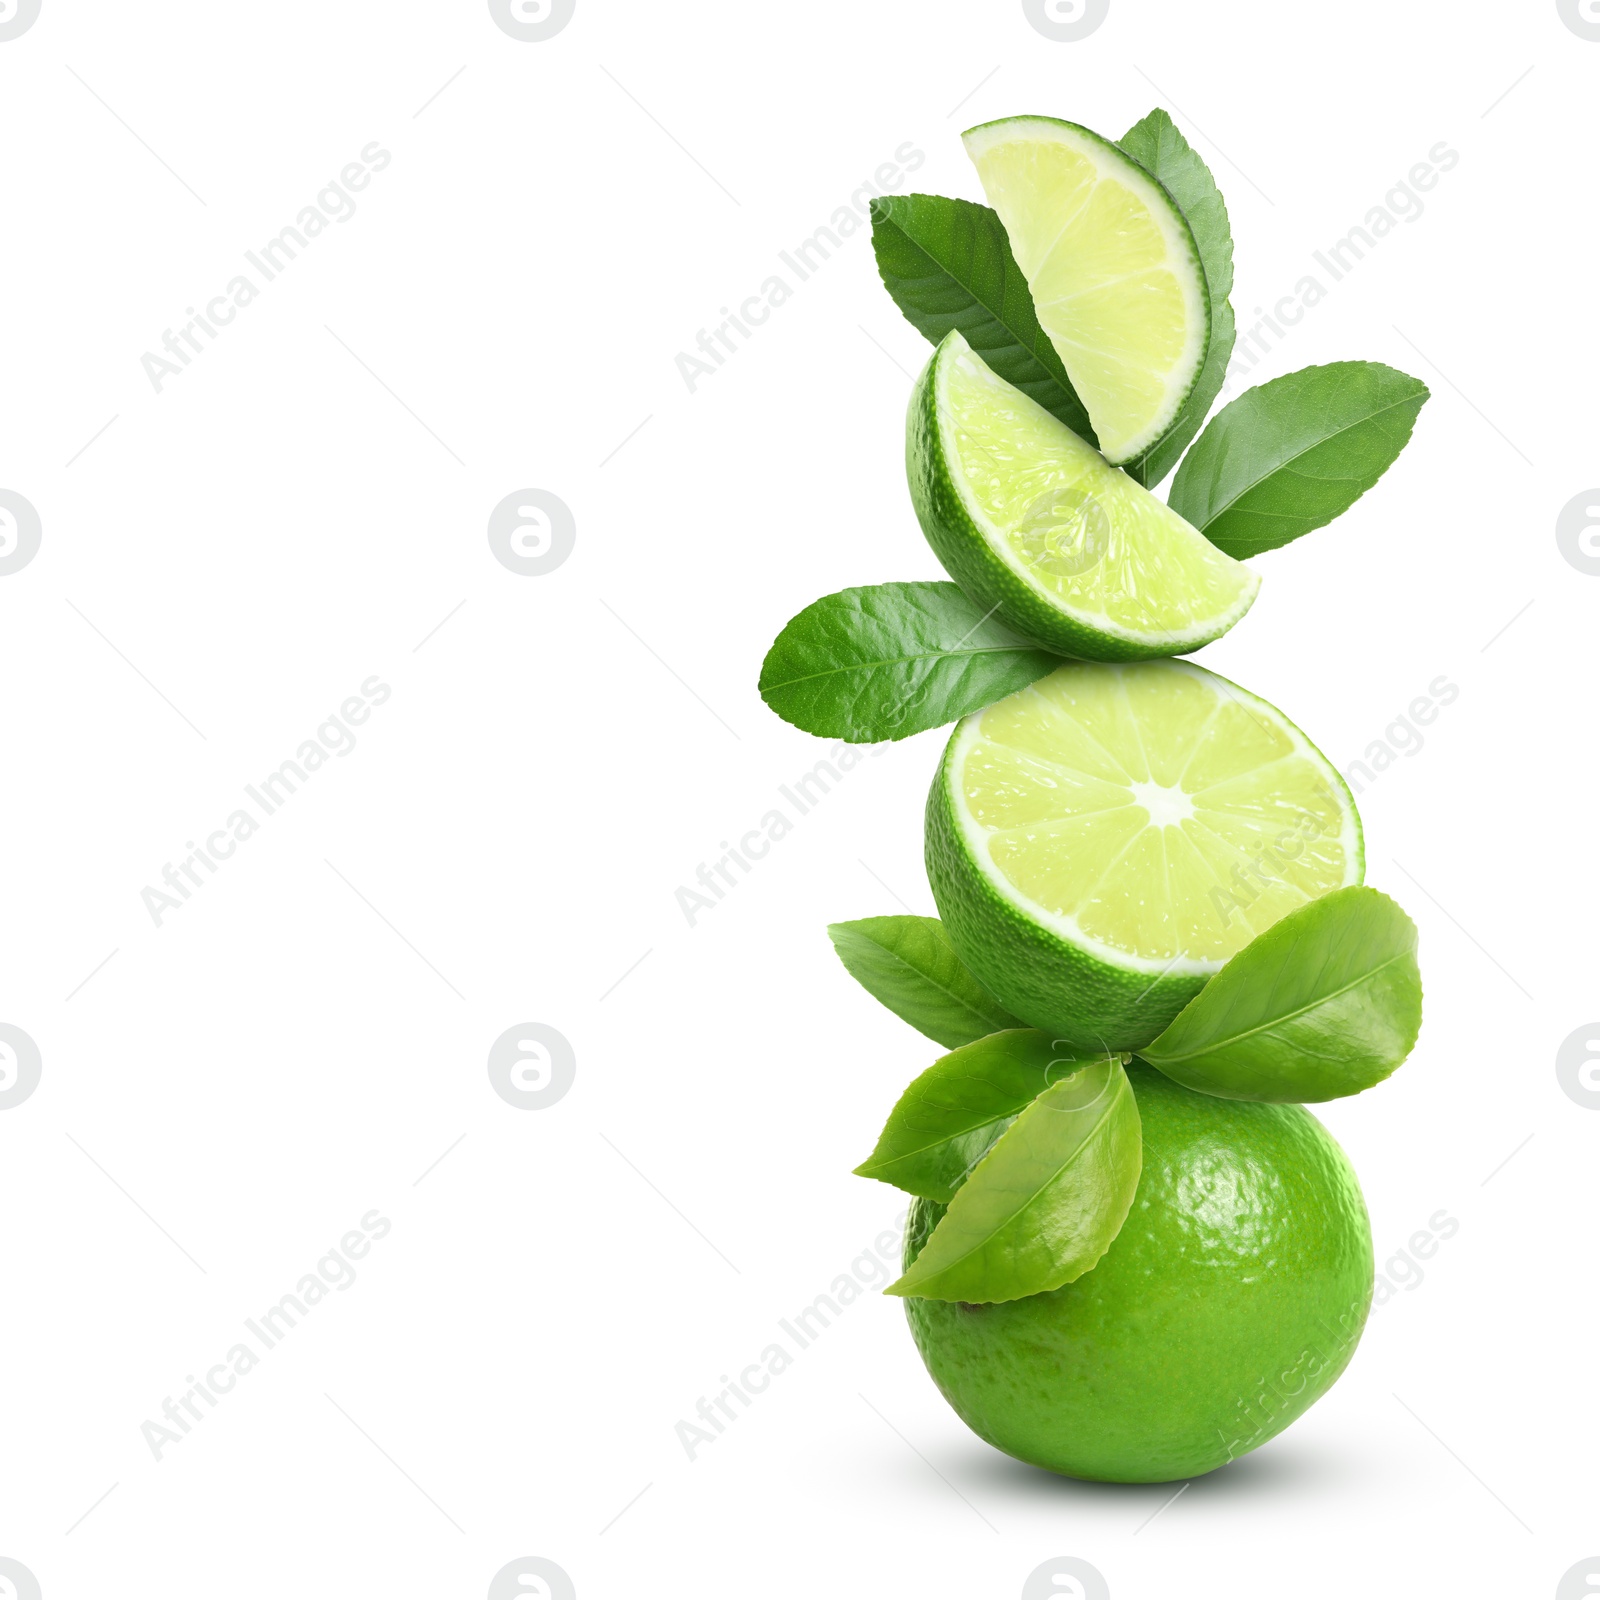 Image of Stacked cut and whole limes with gren leaves on white background